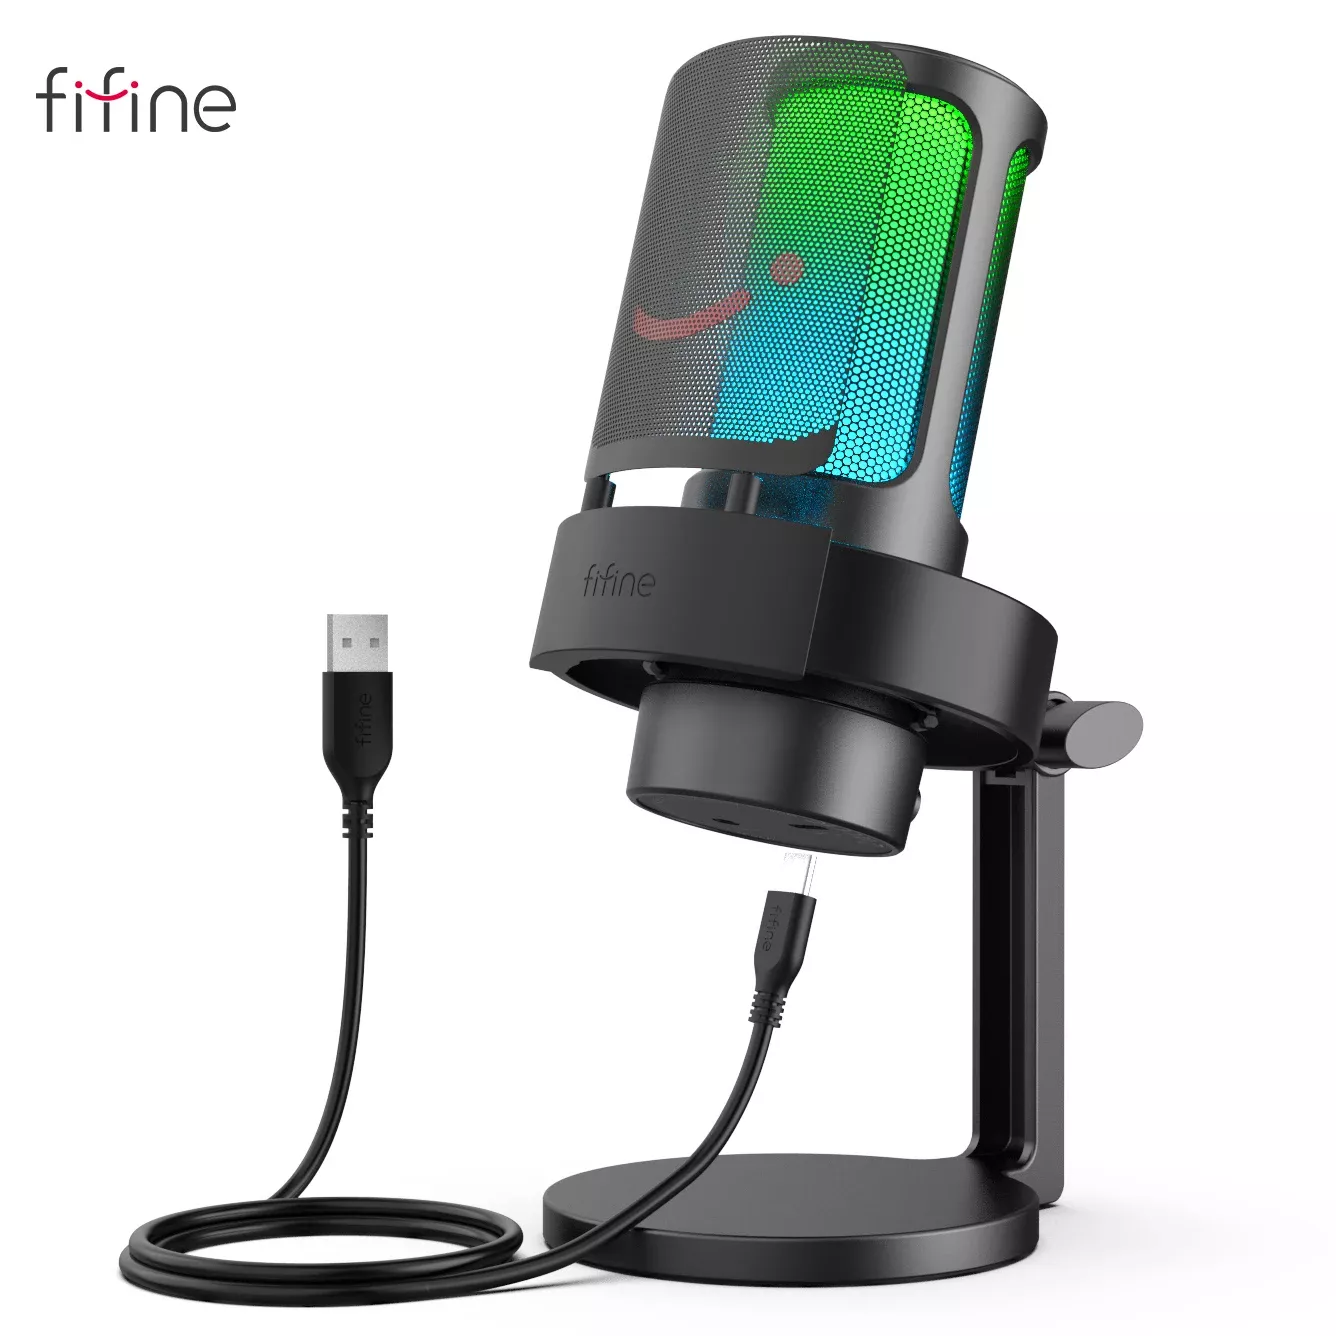 Microfone Fifine Ampligame A8 Rgb